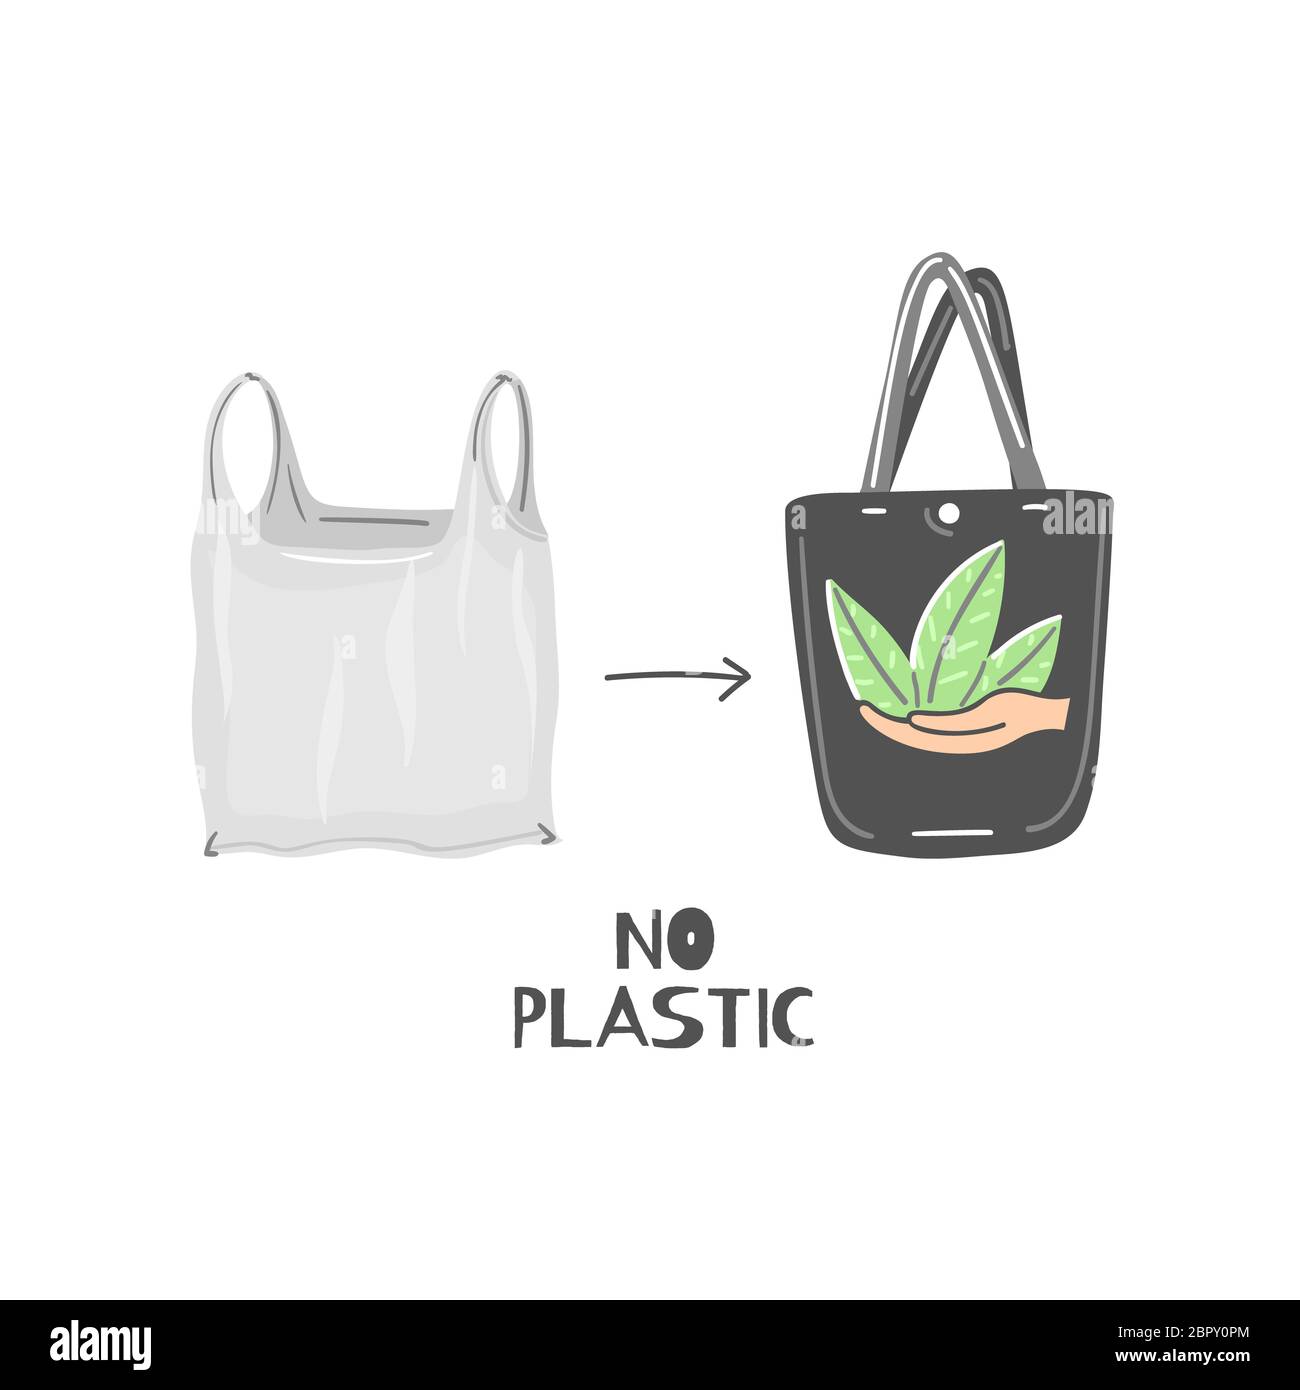 Cloth bag instead of plastic. Zero waste lifestyle. Eco friendly. Save  planet. Care of nature. Vegan. Go green. Refuse, reduce, reuse, recycle, rot.  W Stock Photo - Alamy